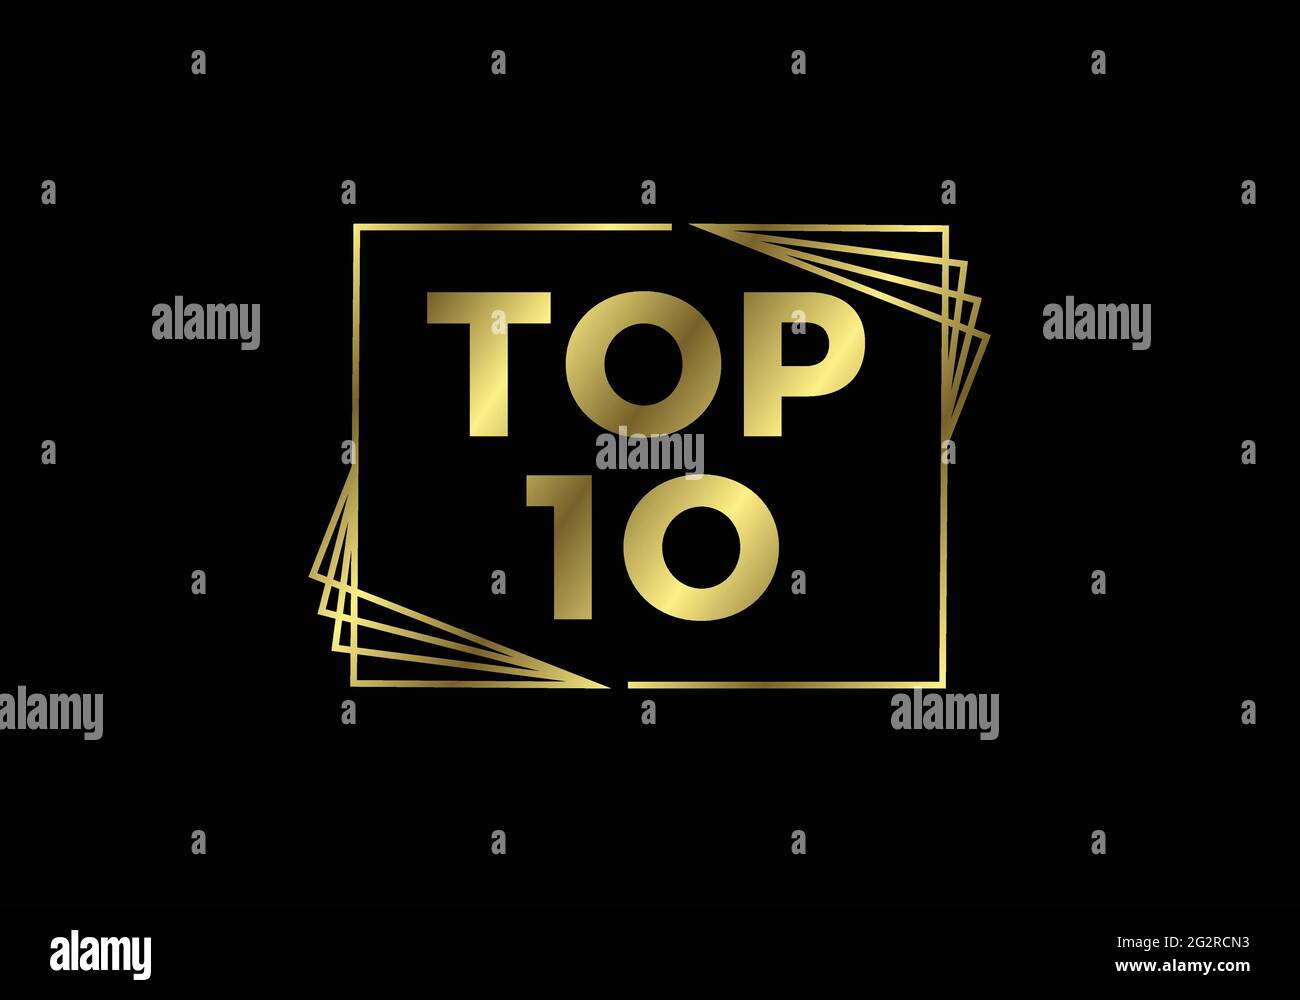 Top ten ranking and best of the best rank. Top 10 golden sign for music video or other content, Vector illustration Stock Vector